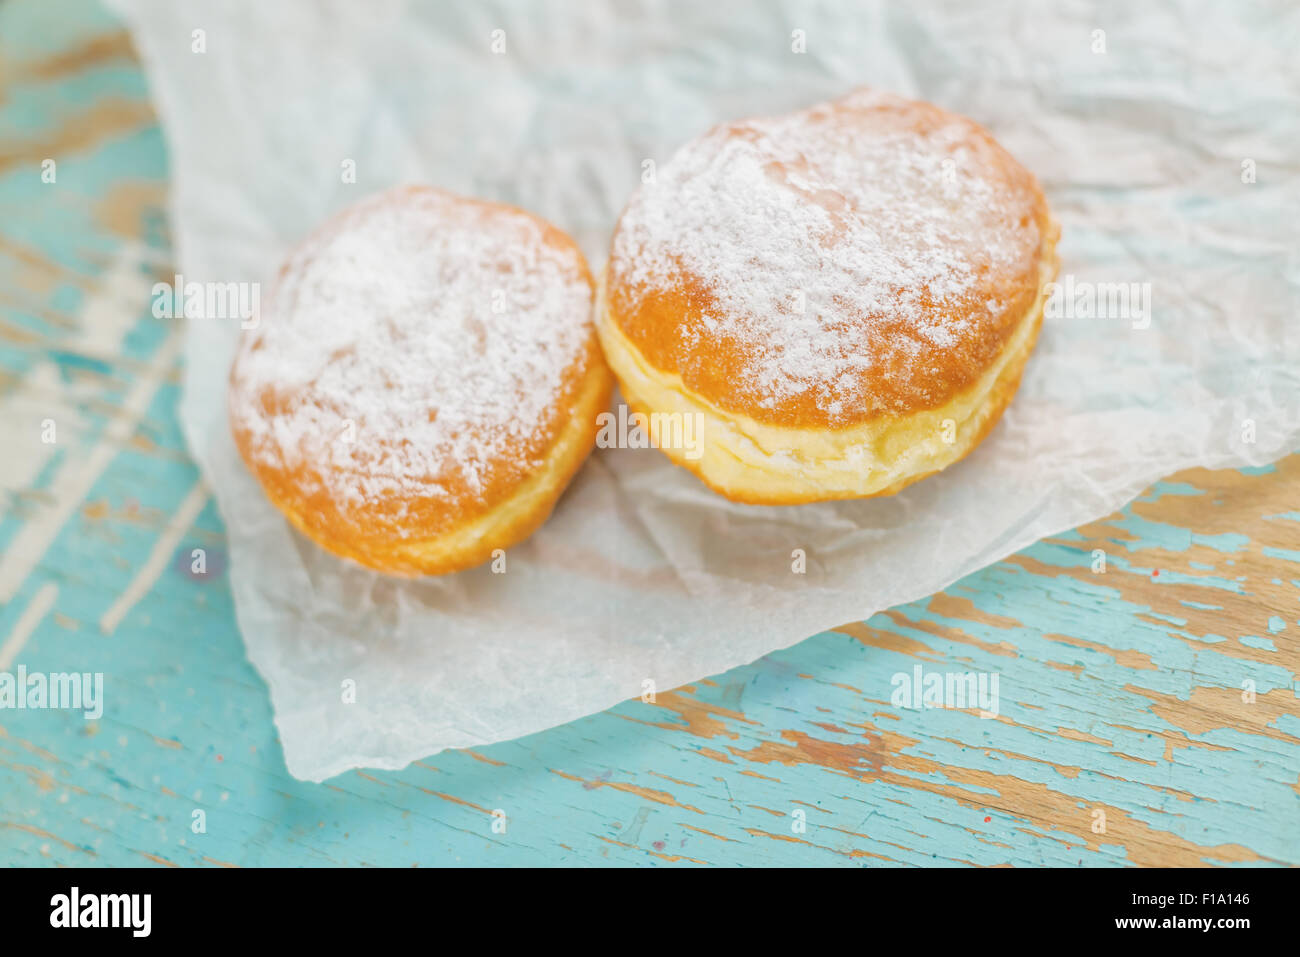 Sweet sugary donuts on rustic wooden kitchen table, tasty bakery doughnuts on crumpled baking paper in vintage retro toned image Stock Photo